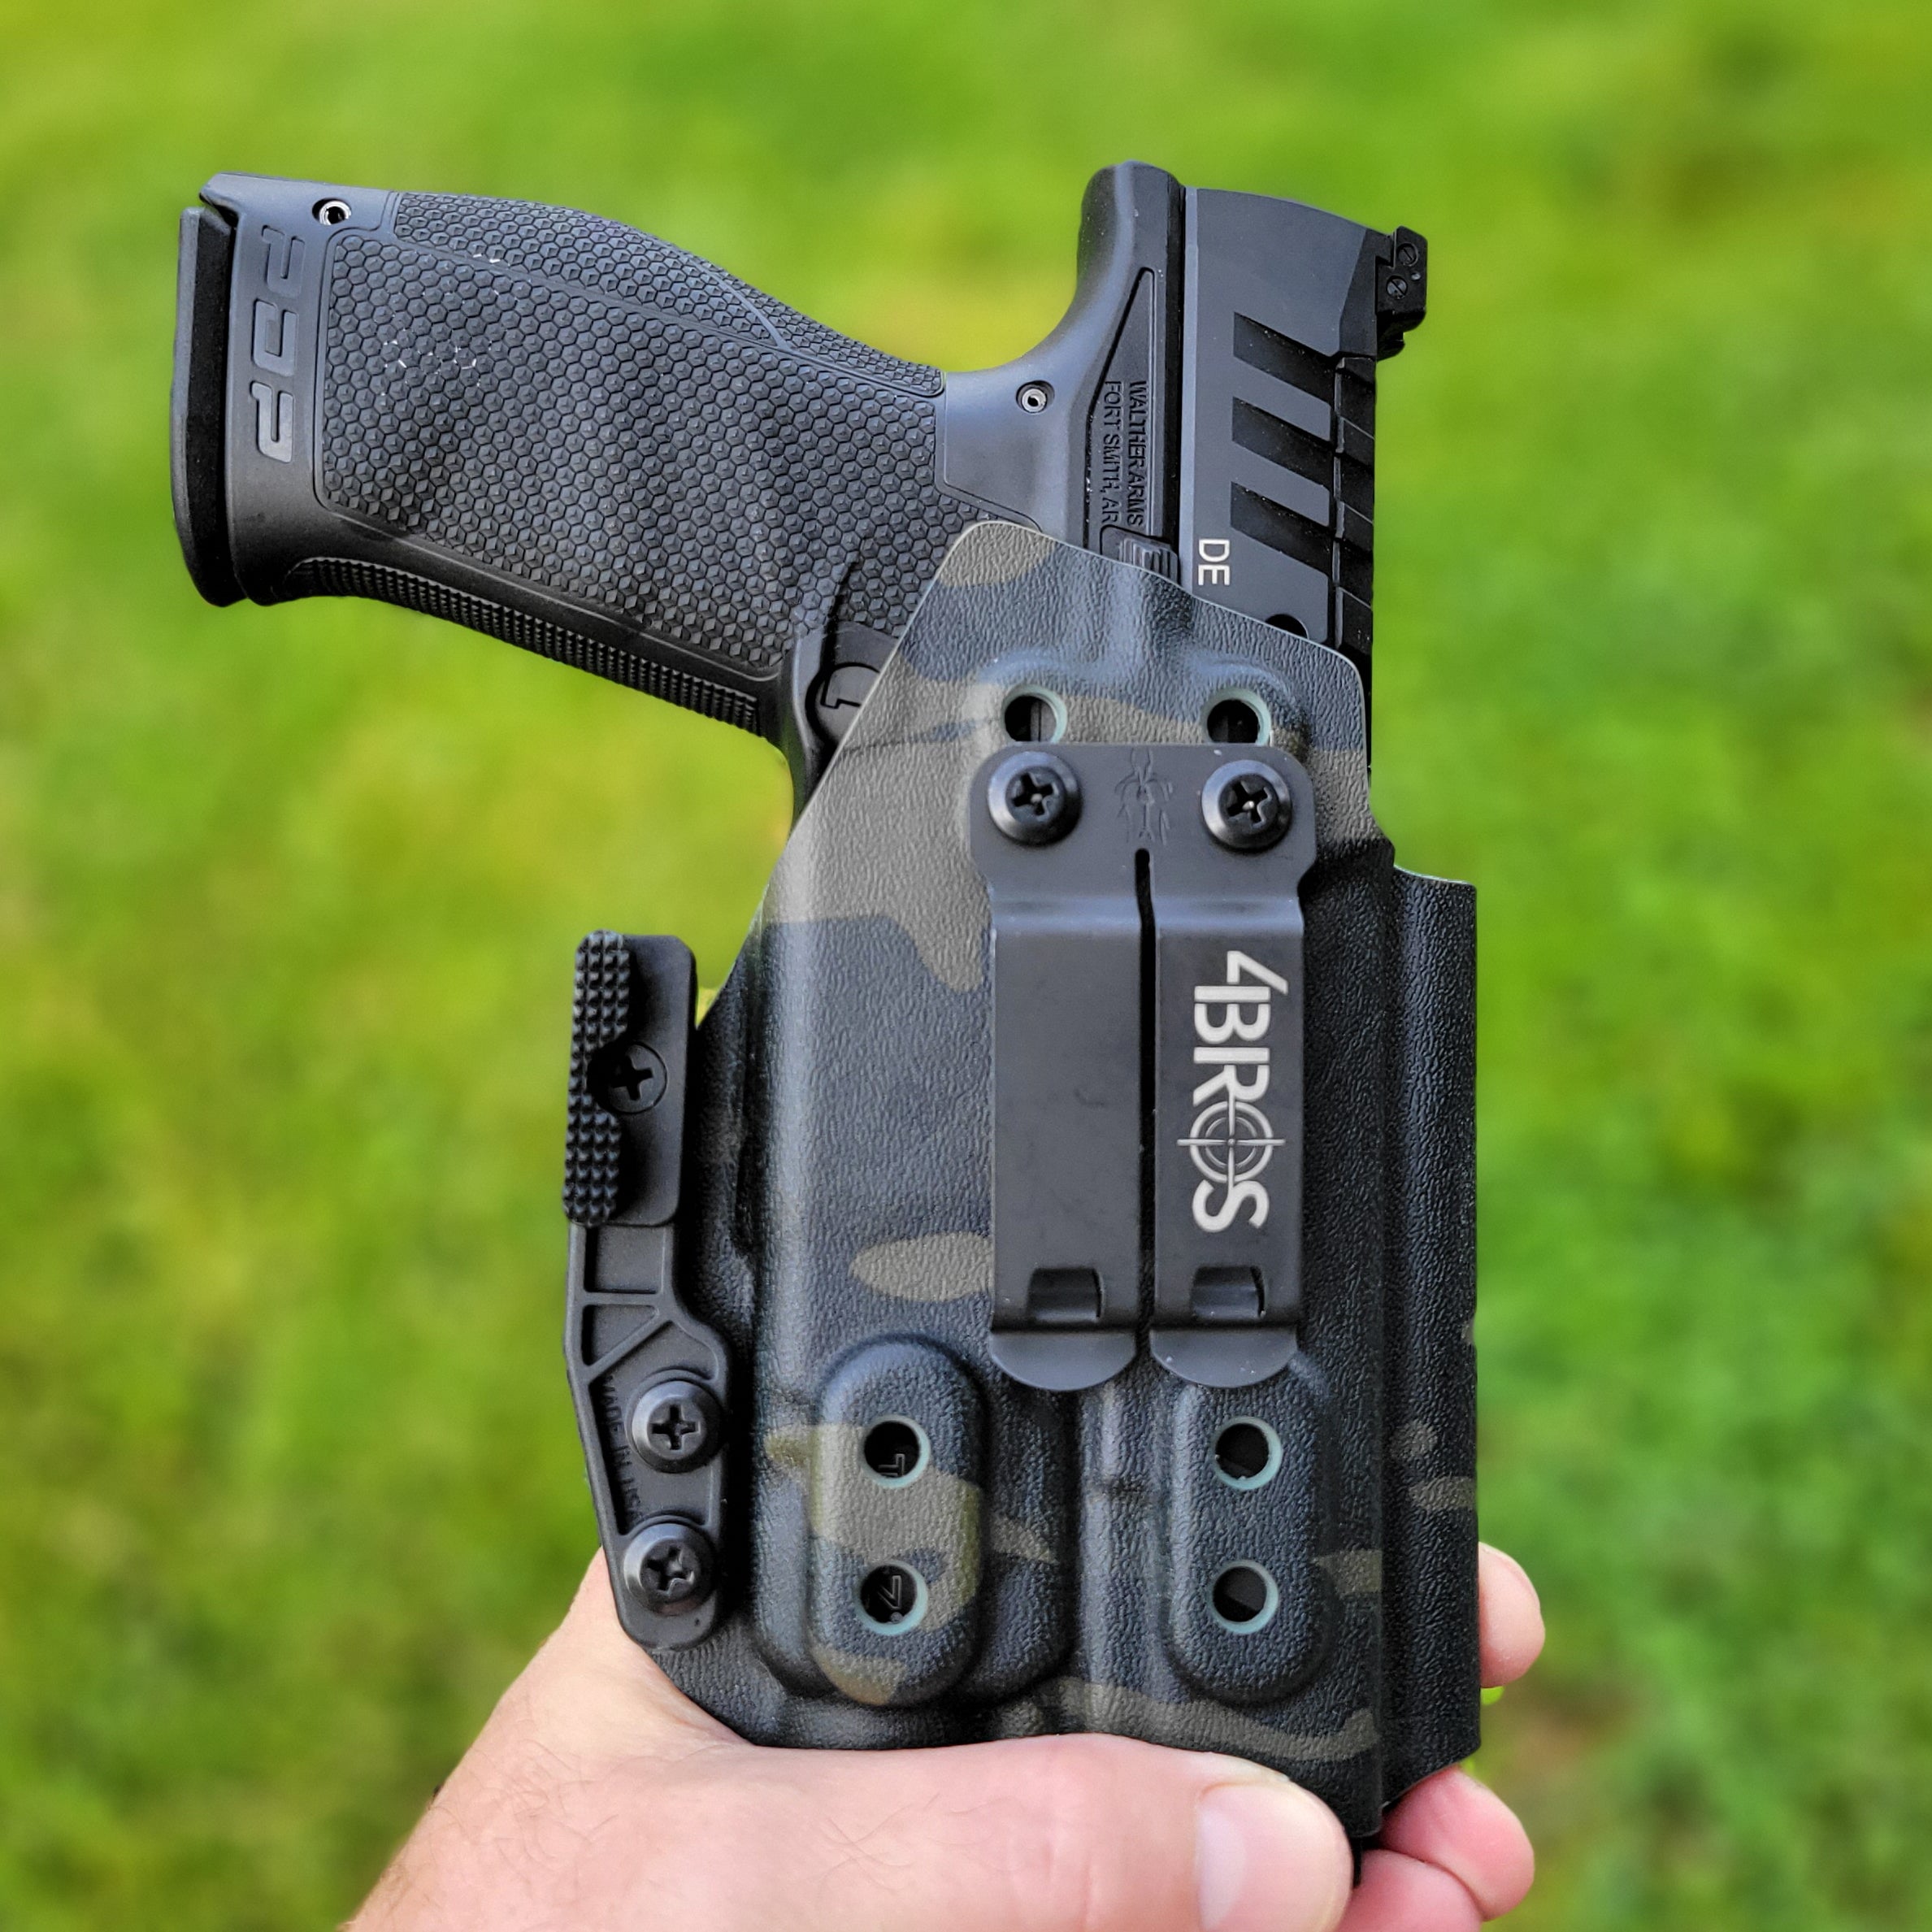 For the best concealed carry Inside Waistband IWB AIWB Holster designed to fit the Walther PDP Compact 4" pistol with Streamlight TLR-7A or TLR-7 on the firearm, shop Four Brothers Holsters. Cut for red dot sight, full sweat guard, adjustable retention & open muzzle for threaded barrels & compensators.